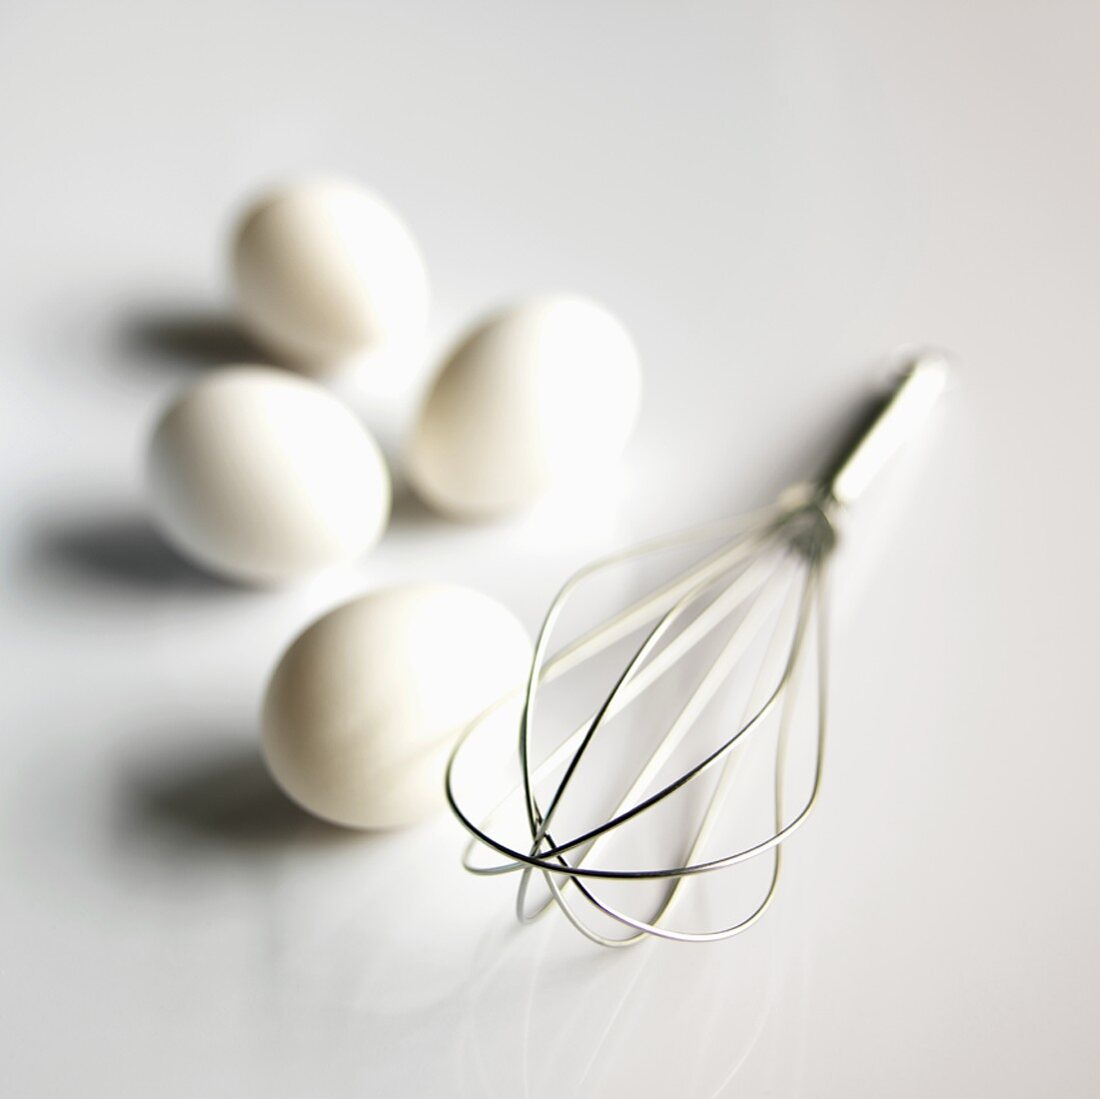 Metal Whisk with  Four White Eggs